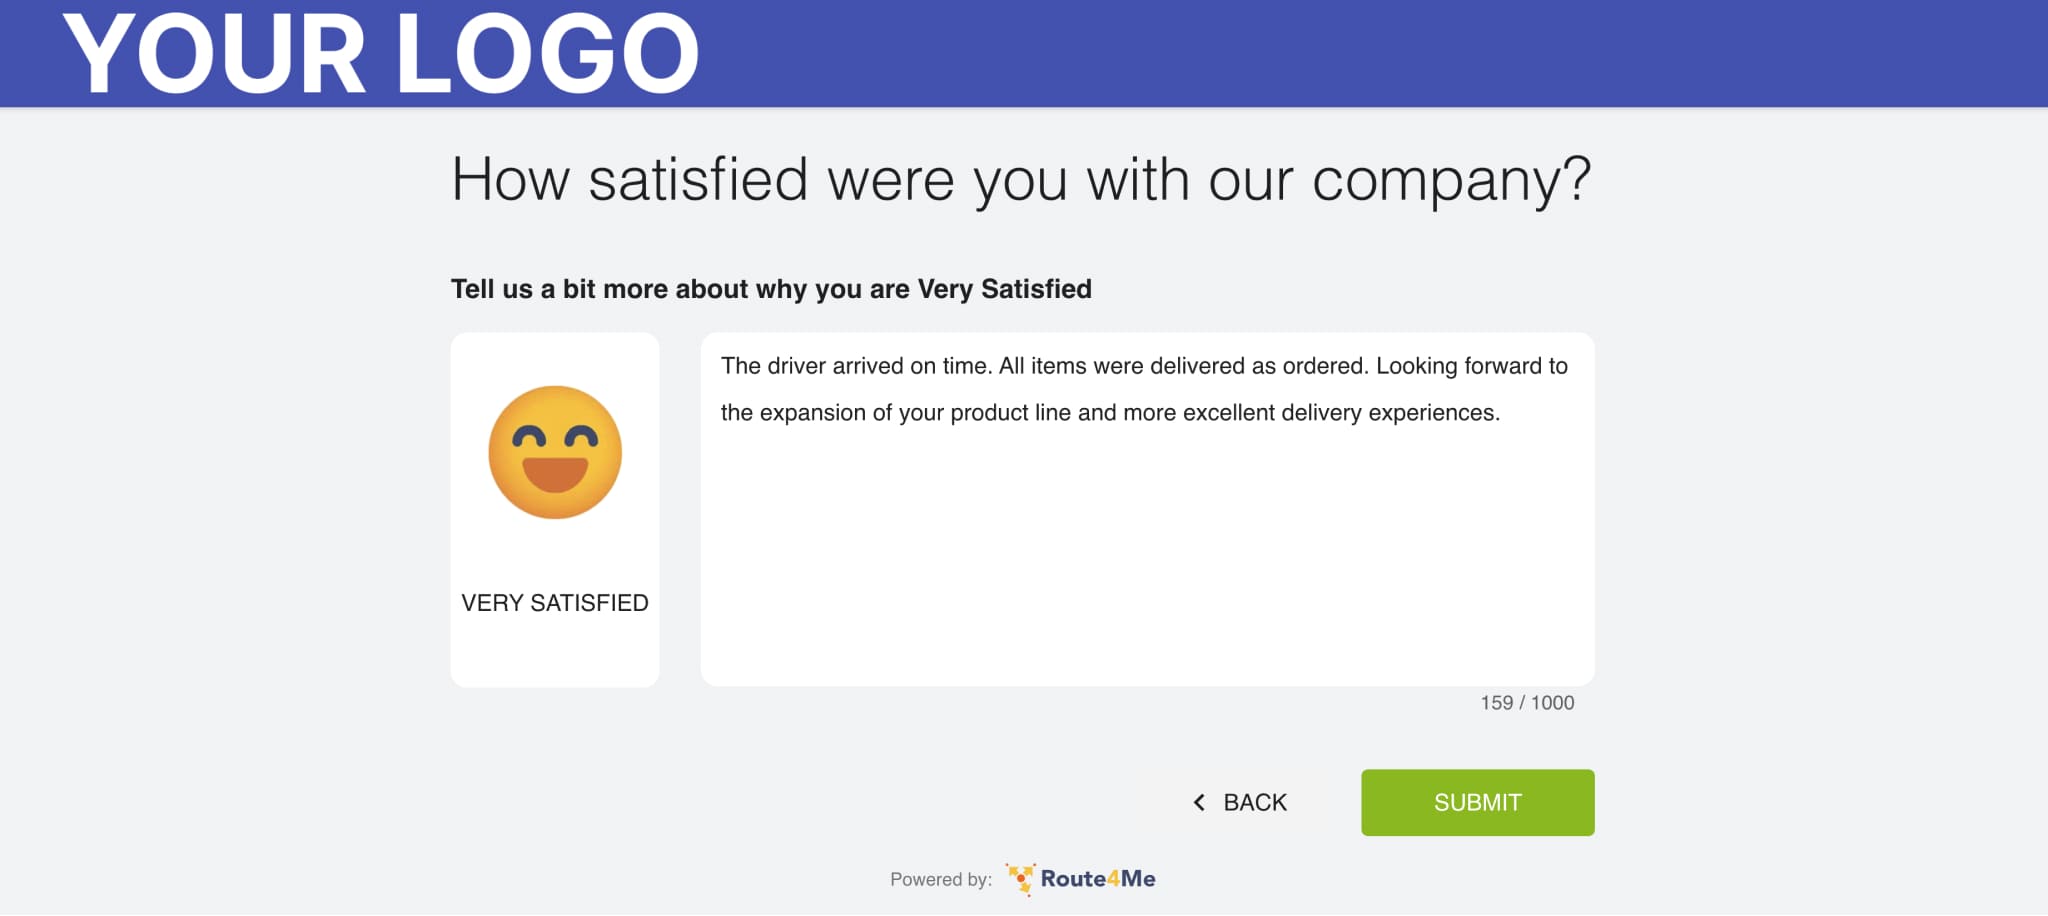 Leave your customer satisfaction feedback about the provided services in the text field.